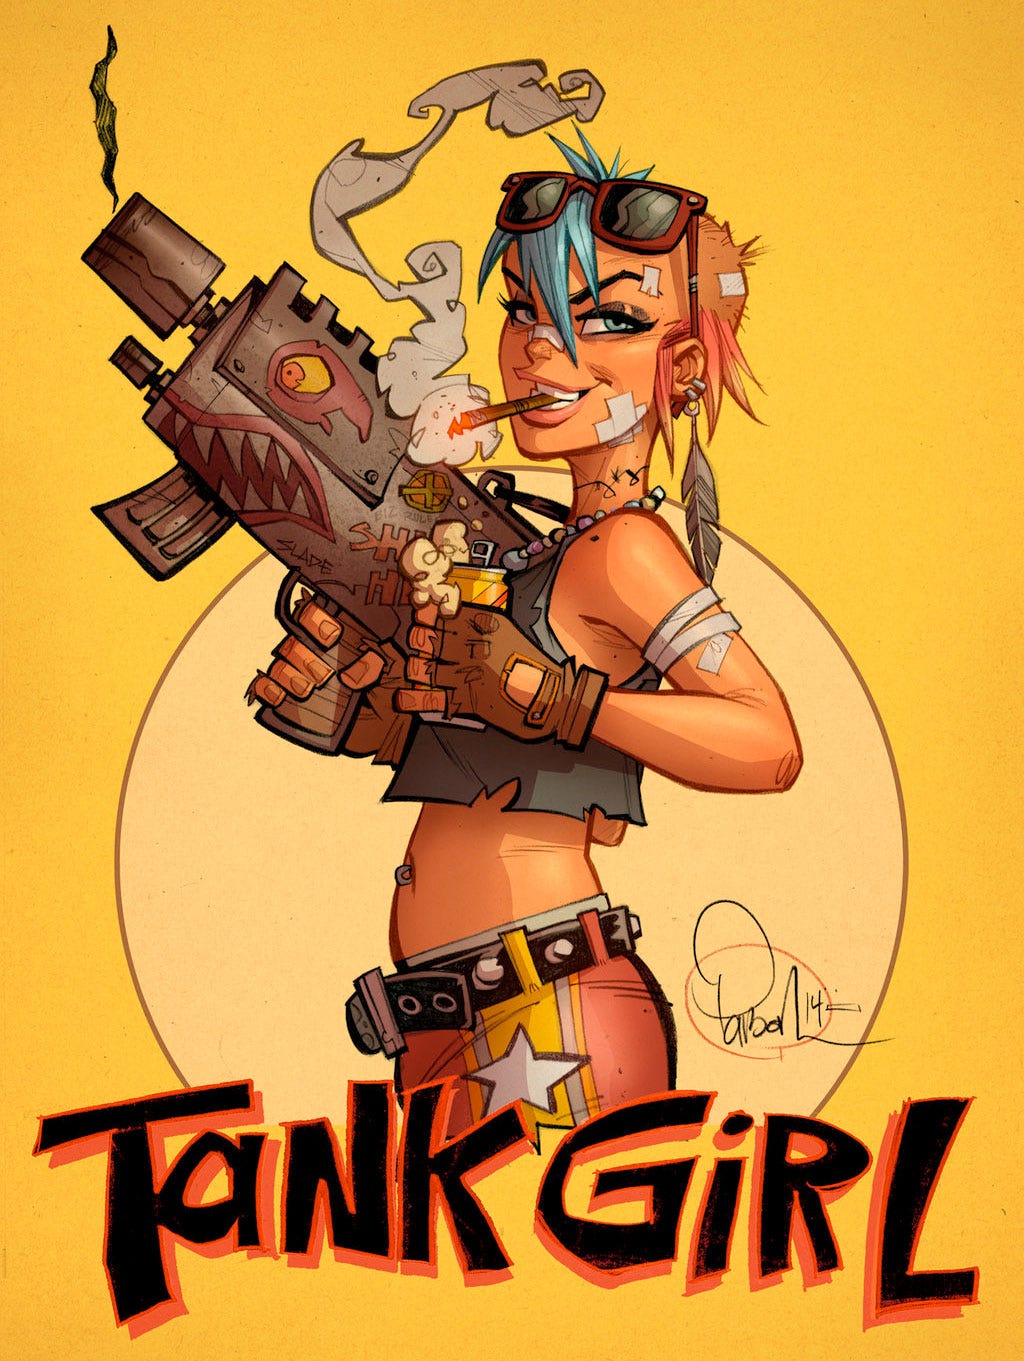 Delve into the post apocalyptic world of Comic's foul-mouthed heroine: Tank  Girl - the girl U want